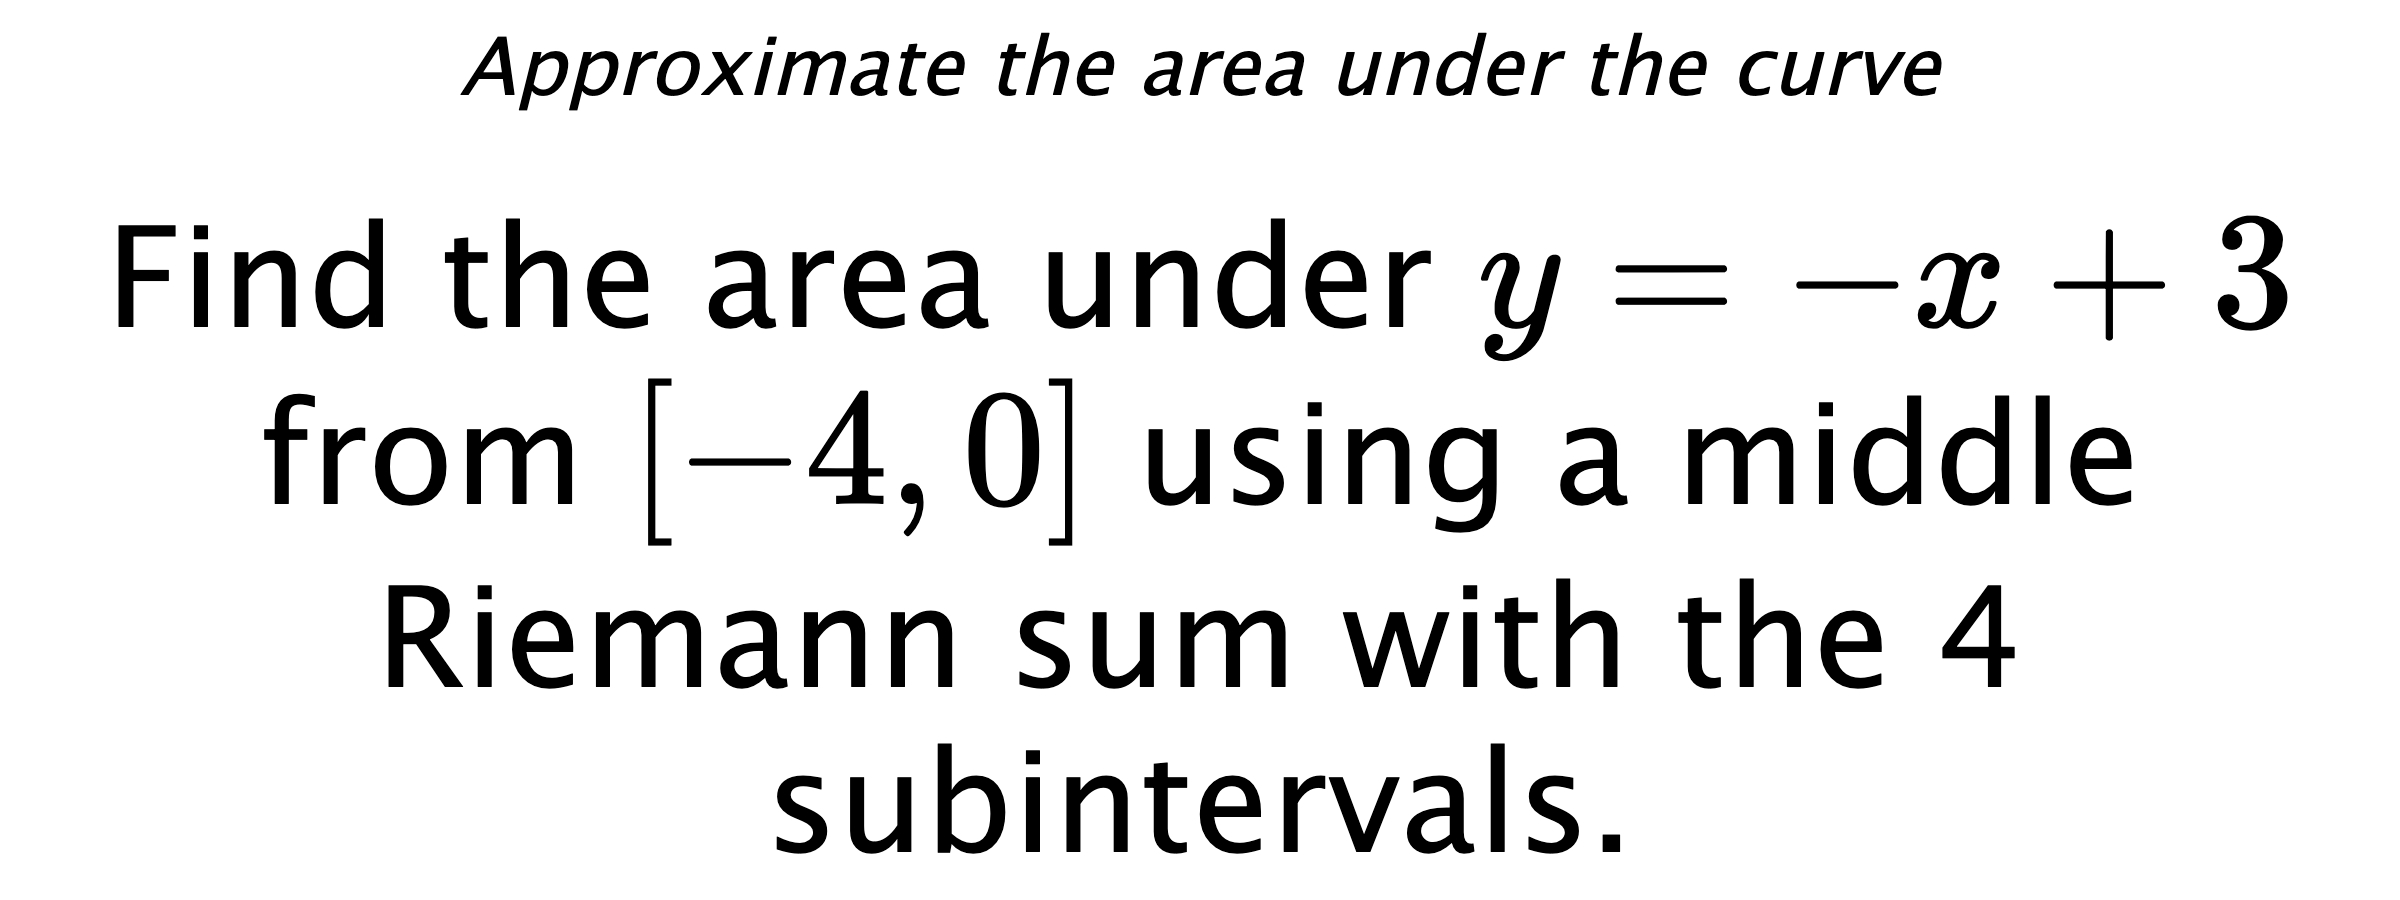 Approximate the area under the curve Find the area under $ y=-x+3 $ from $ [-4,0] $ using a middle Riemann sum with the 4 subintervals.